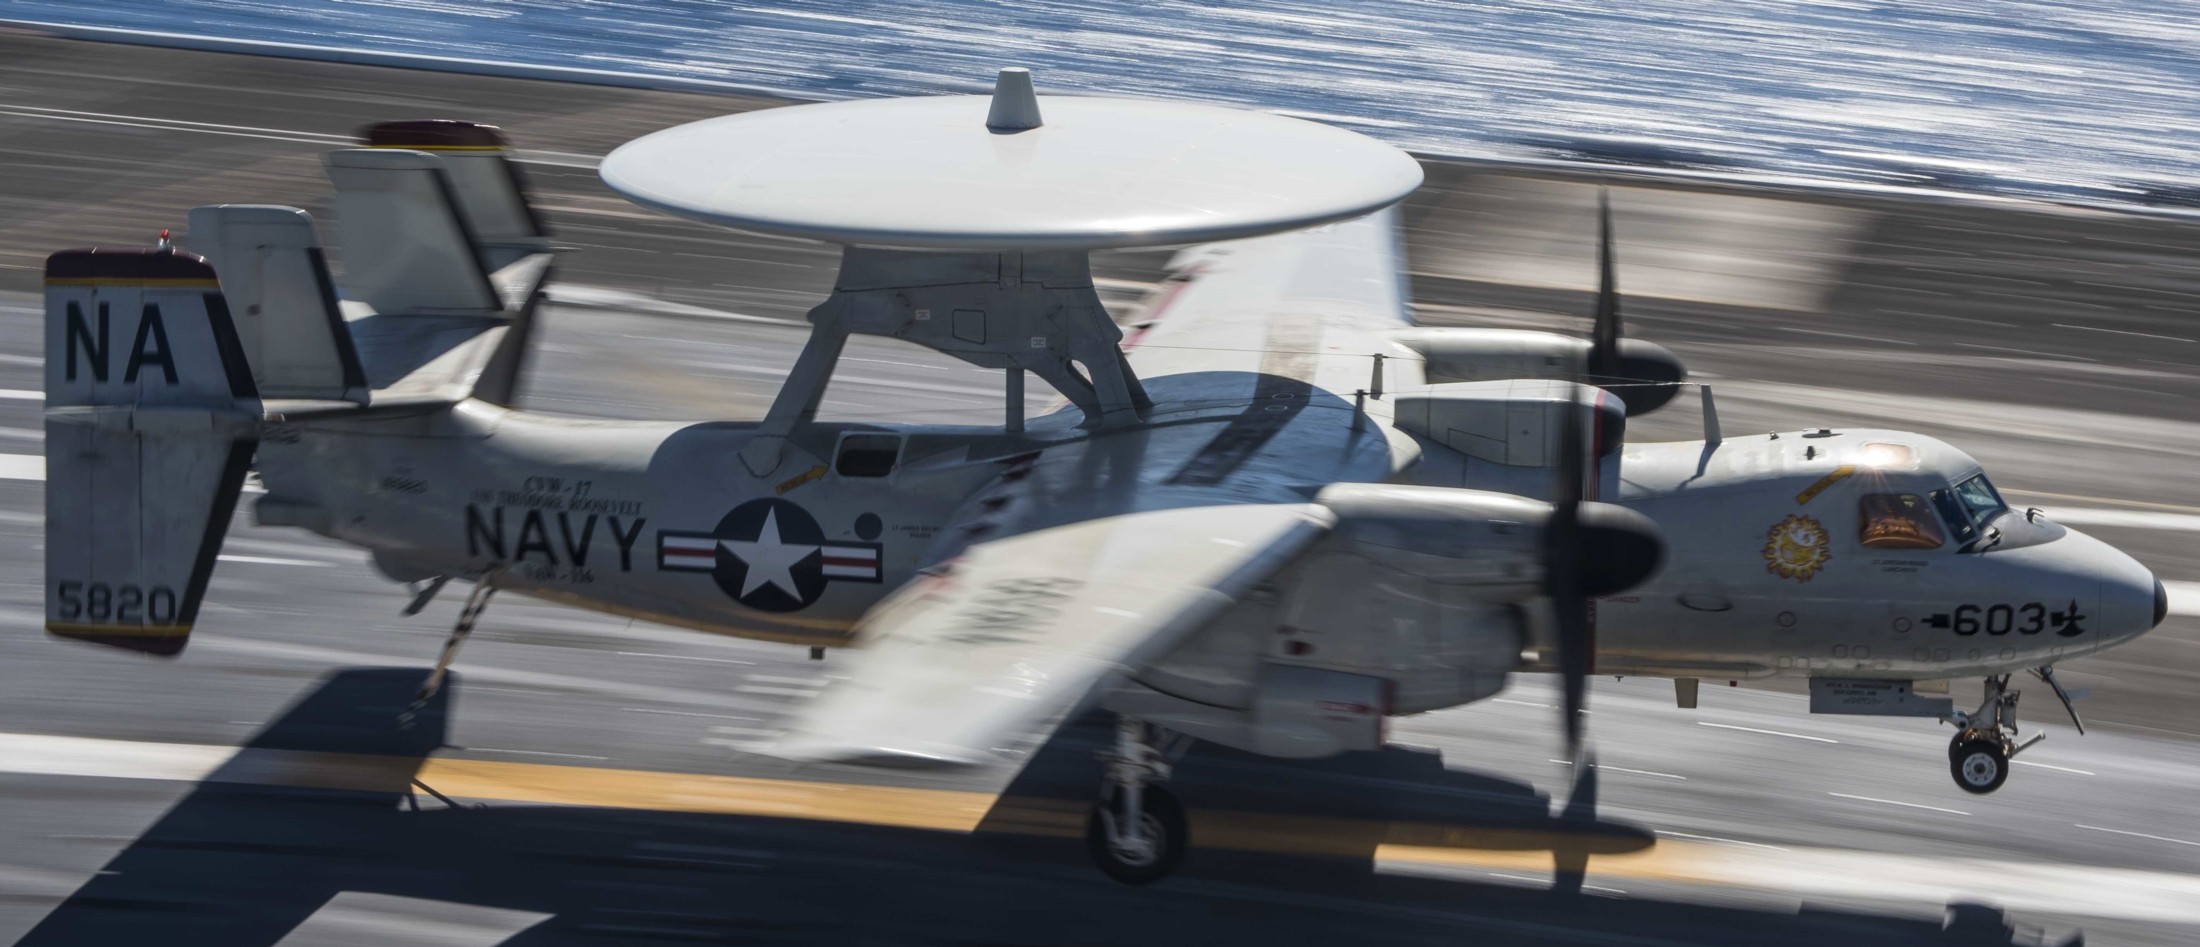 vaw-116 sun kings airborne command control squadron carrier early warning cvw-17 uss theodore roosevelt cvn-71 63